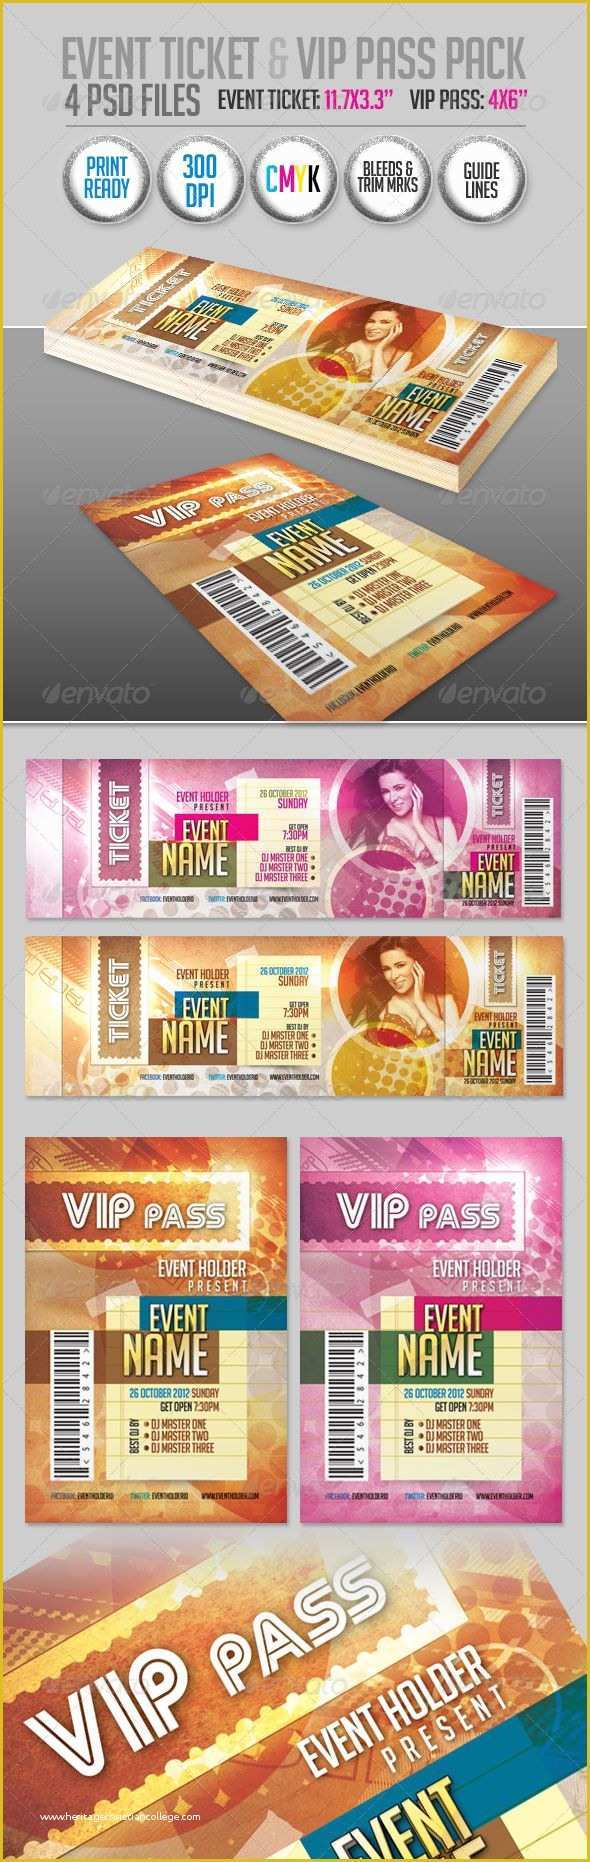 Event Ticket Template Psd Free Download Of event Ticket &amp; Vip Pass Pack